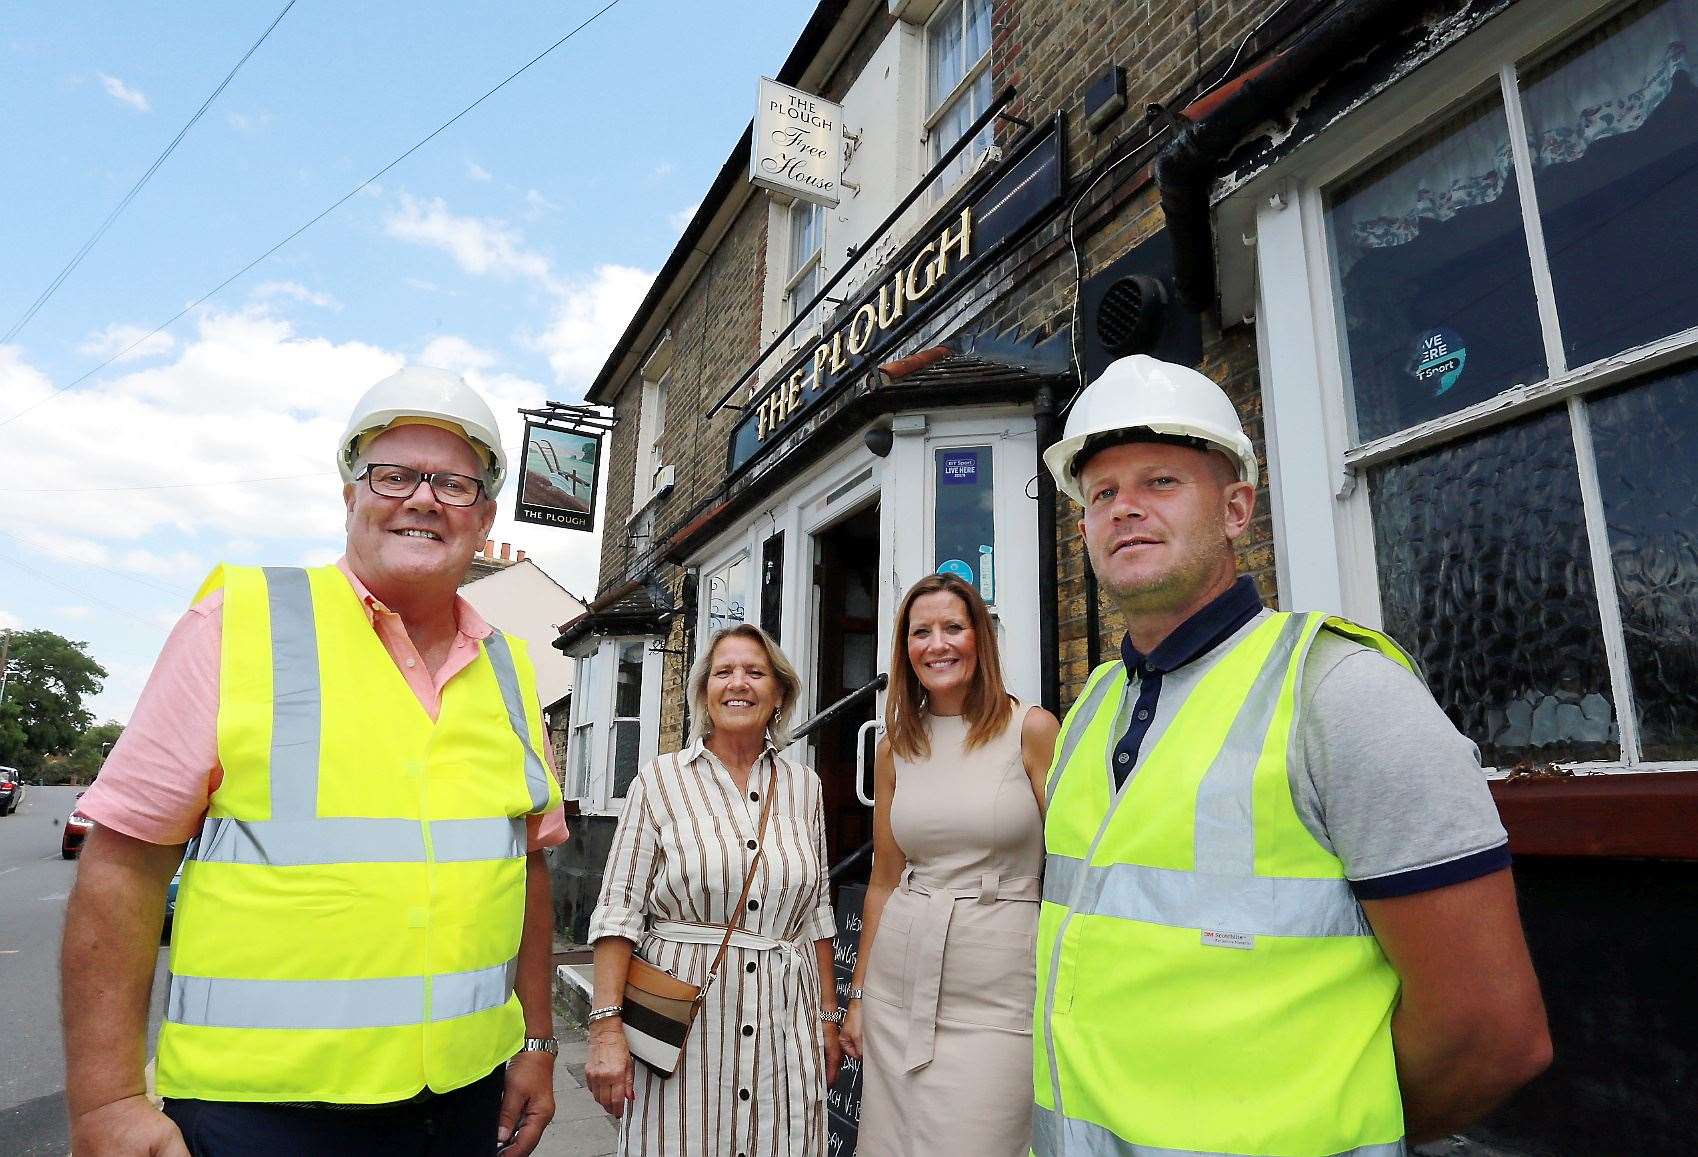 The Clack's are taking on their third pub in Dartford and are set to give The Plough a £260,000 refurbishment